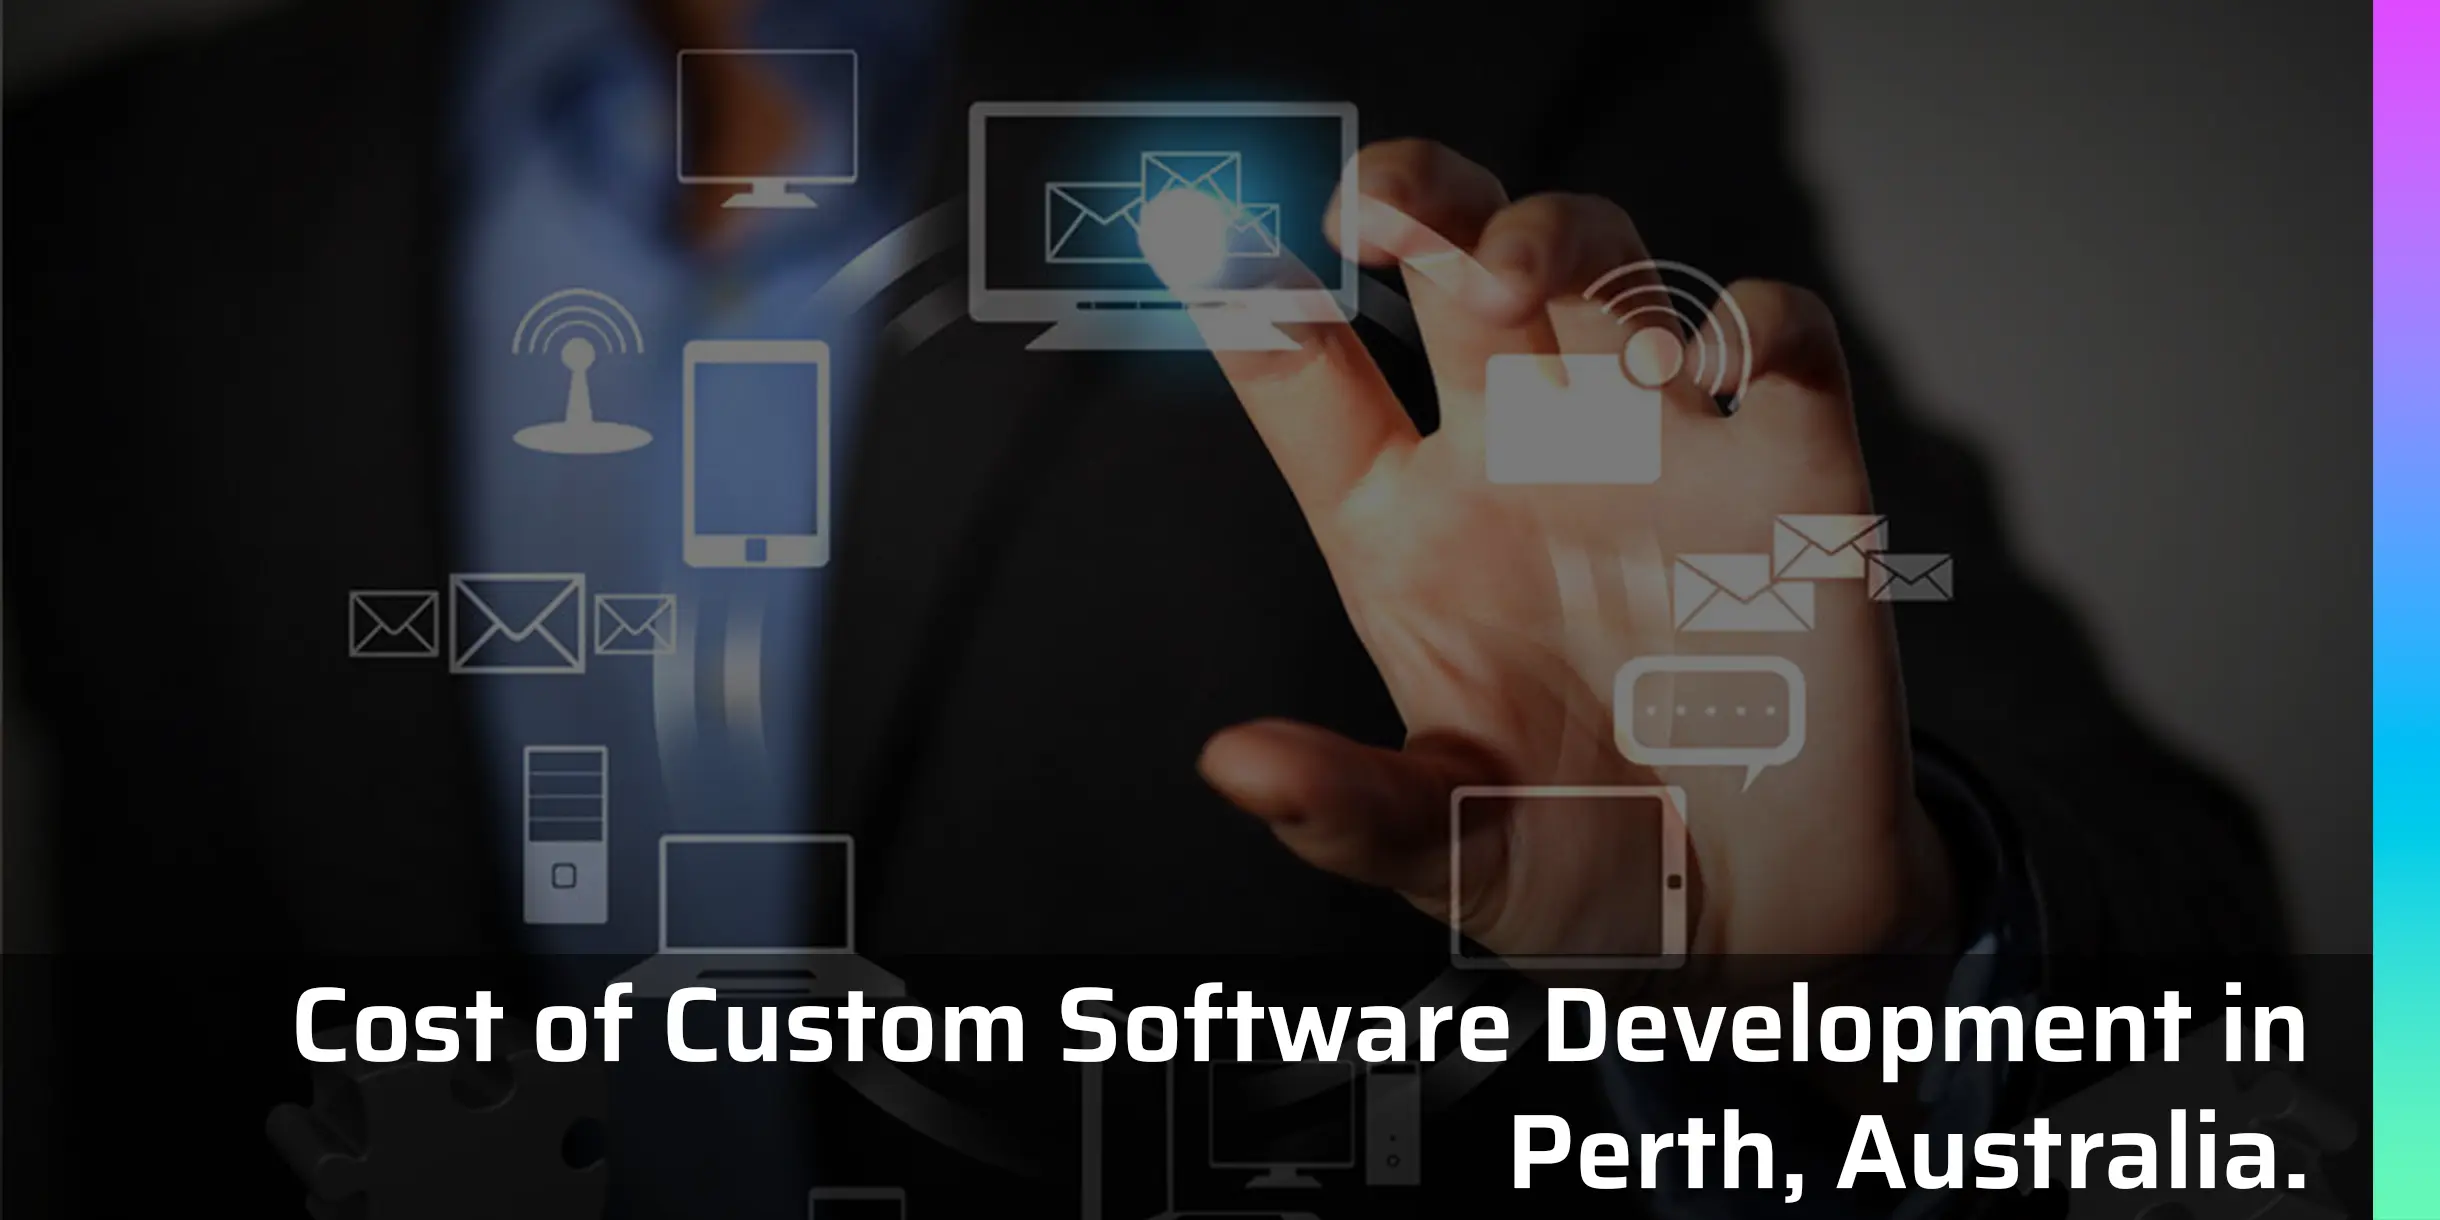 How Much Does it Cost to Create Custom Software Development in Perth, Australia